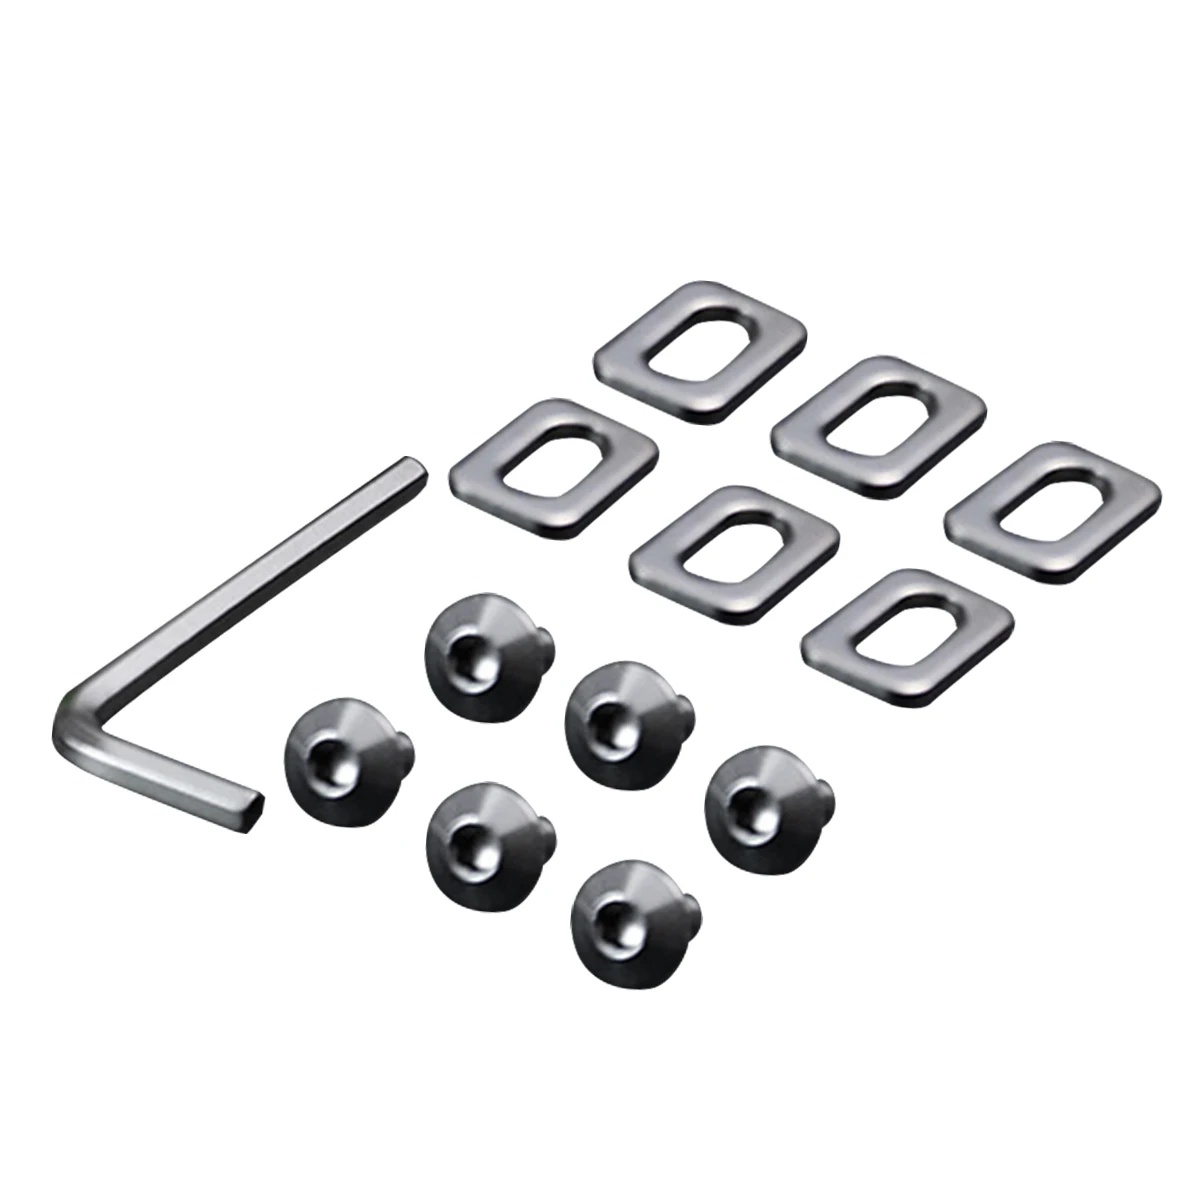 1 Set Road Bicycle Pedal Cleats Screw for Road Bike Pedals Cleats Self-locking Pedals Bolts  Screws Set Kit 105 pd r7000 pd5800 r540 r550 road bike pedals carbon self locking pedals spd pedals with sm sh11 cleats